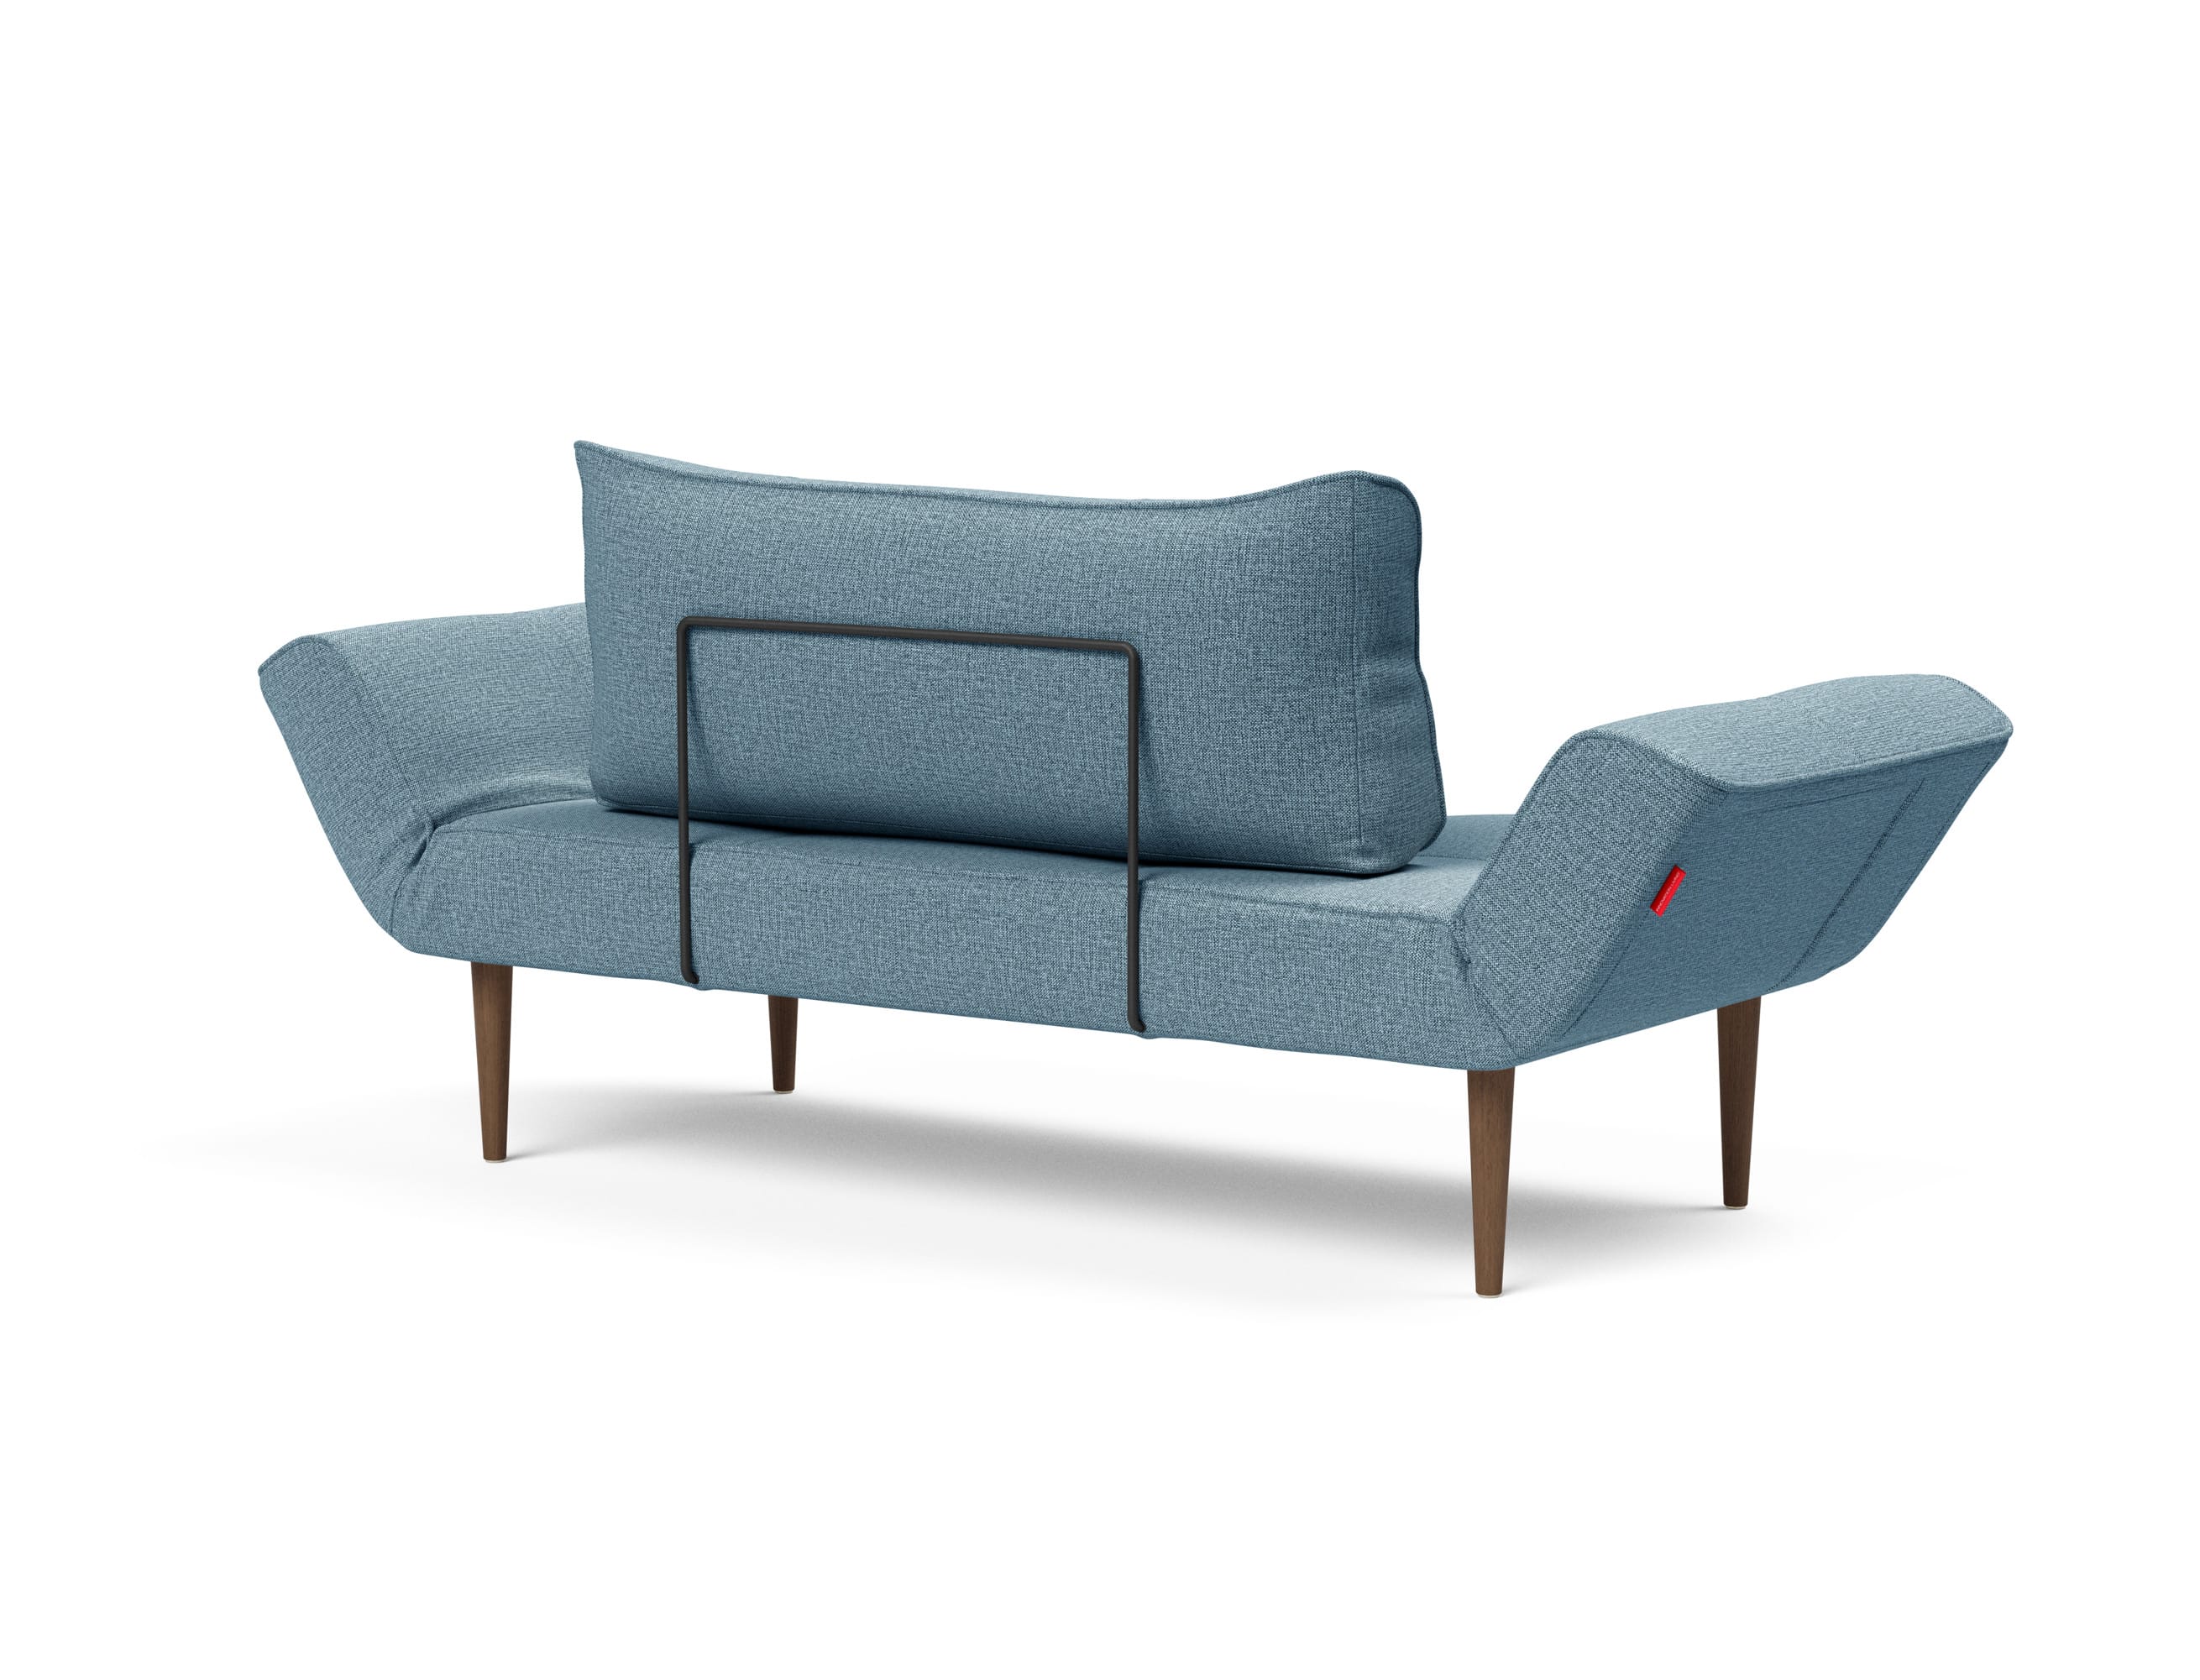 Zeal Deluxe Blue Innovation by Bed Light Sofa Daybed Mixed Dance